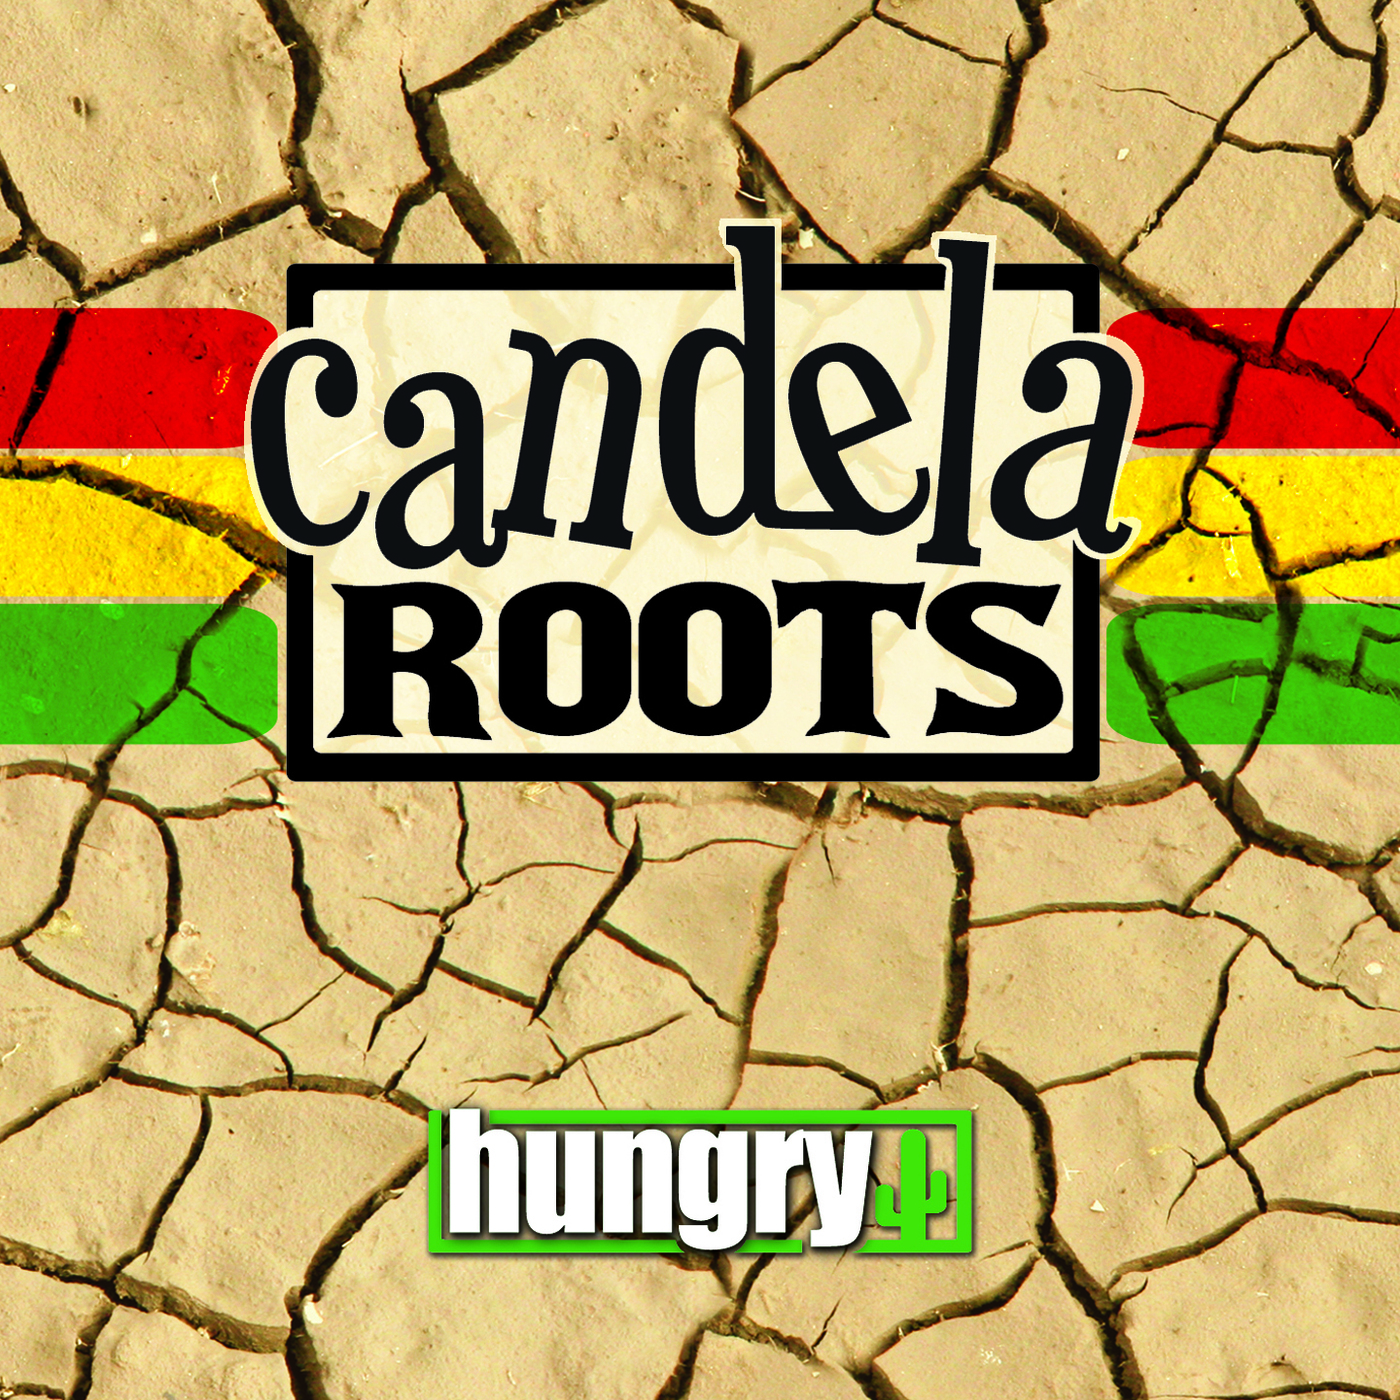 Candela Roots - Hungry | musica en valencià